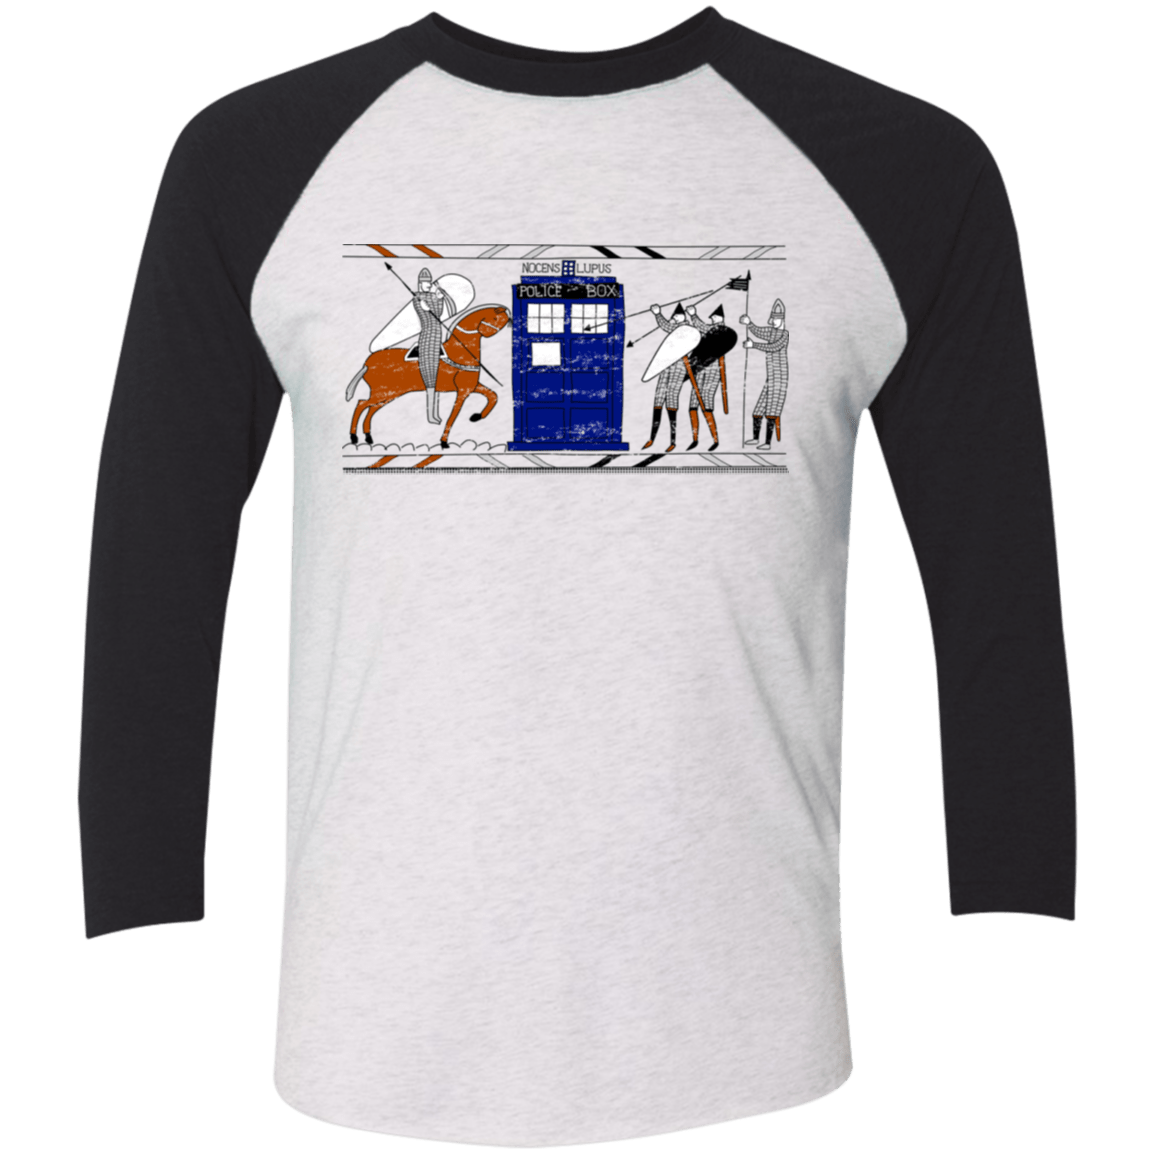 T-Shirts Heather White/Vintage Black / X-Small Nocens Lupus Tardis in the Bayeux Tapestry Men's Triblend 3/4 Sleeve